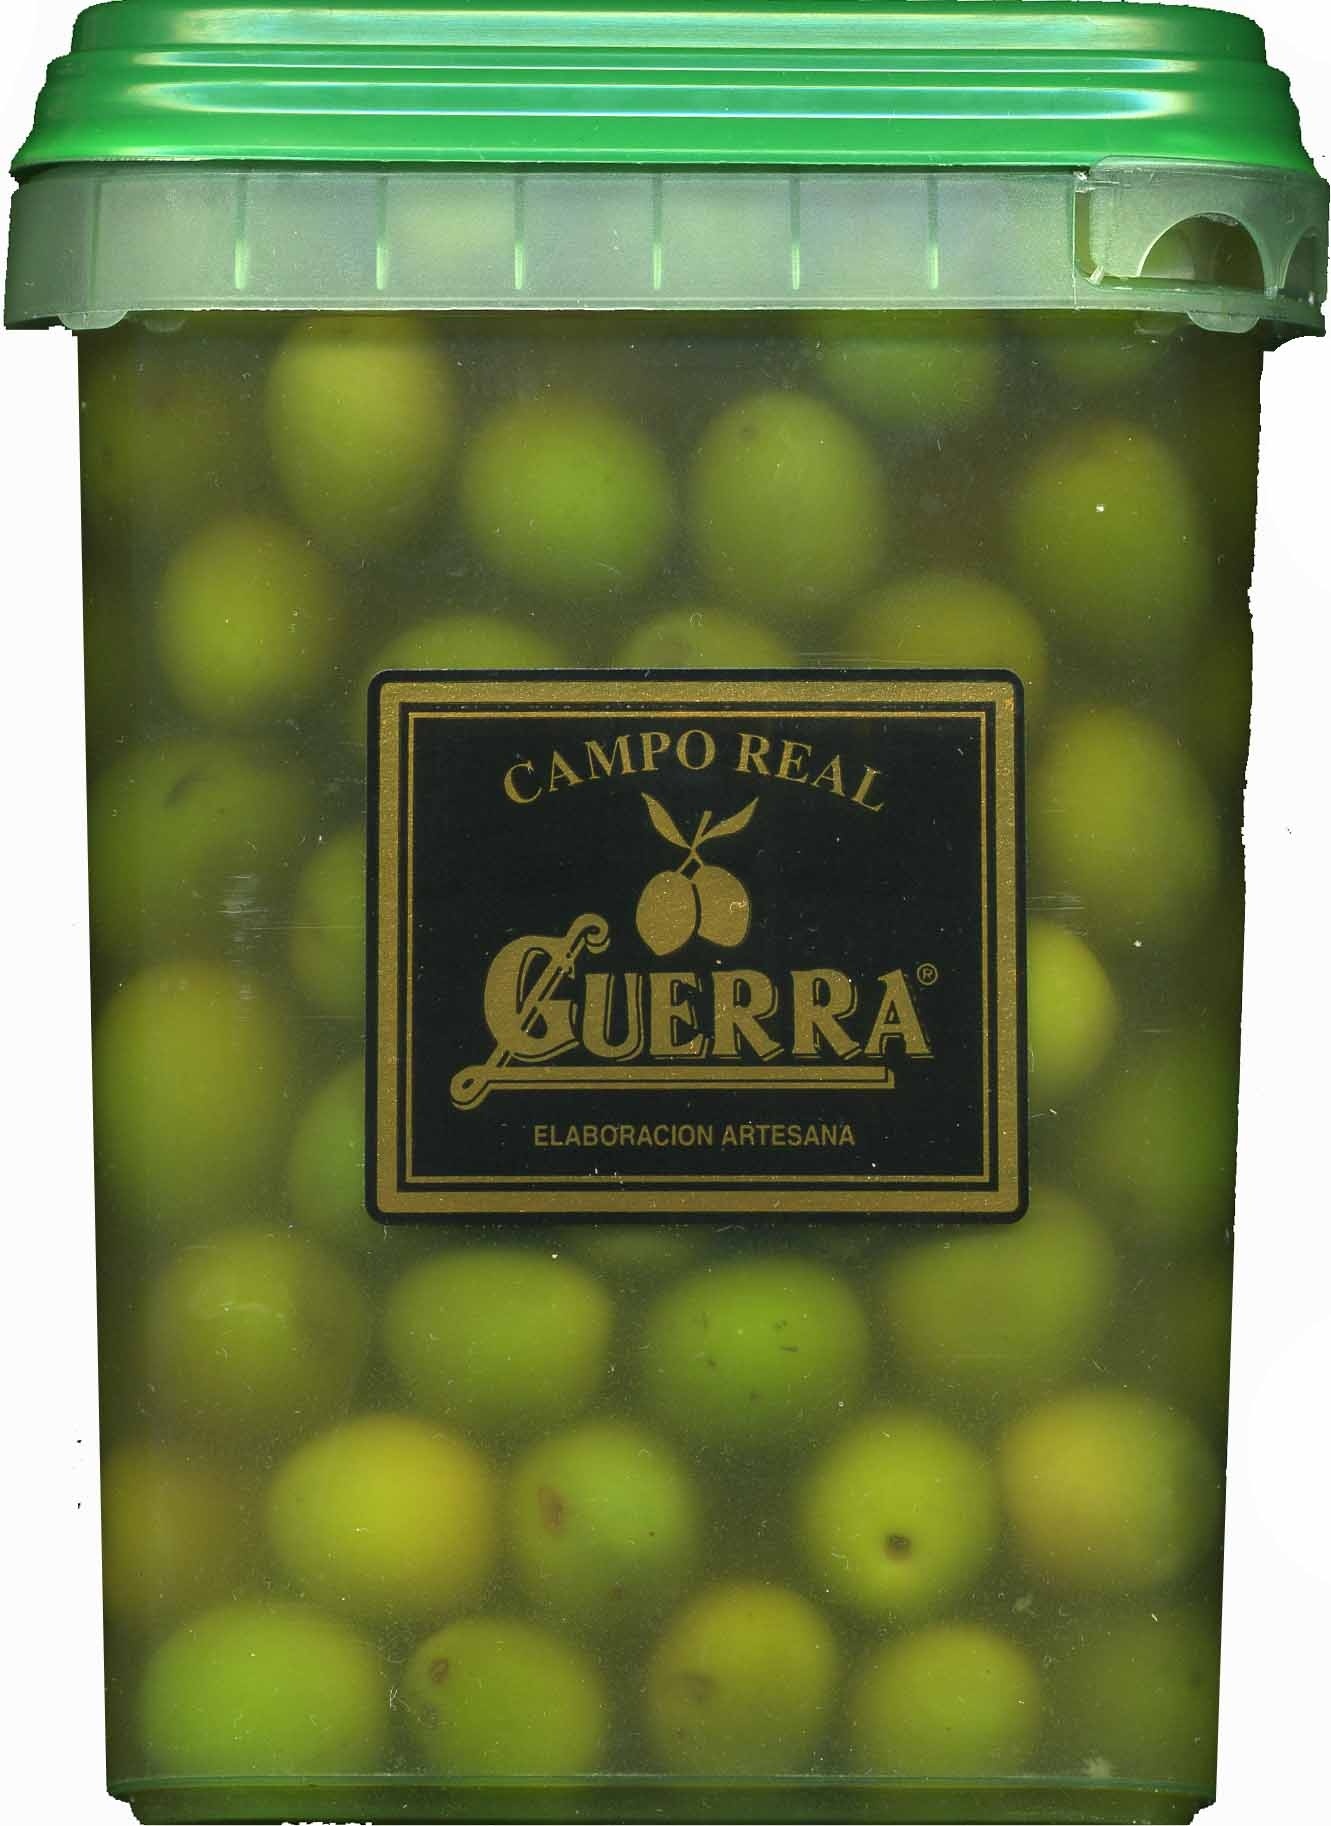 Aceitunas Campo Real - Product - es